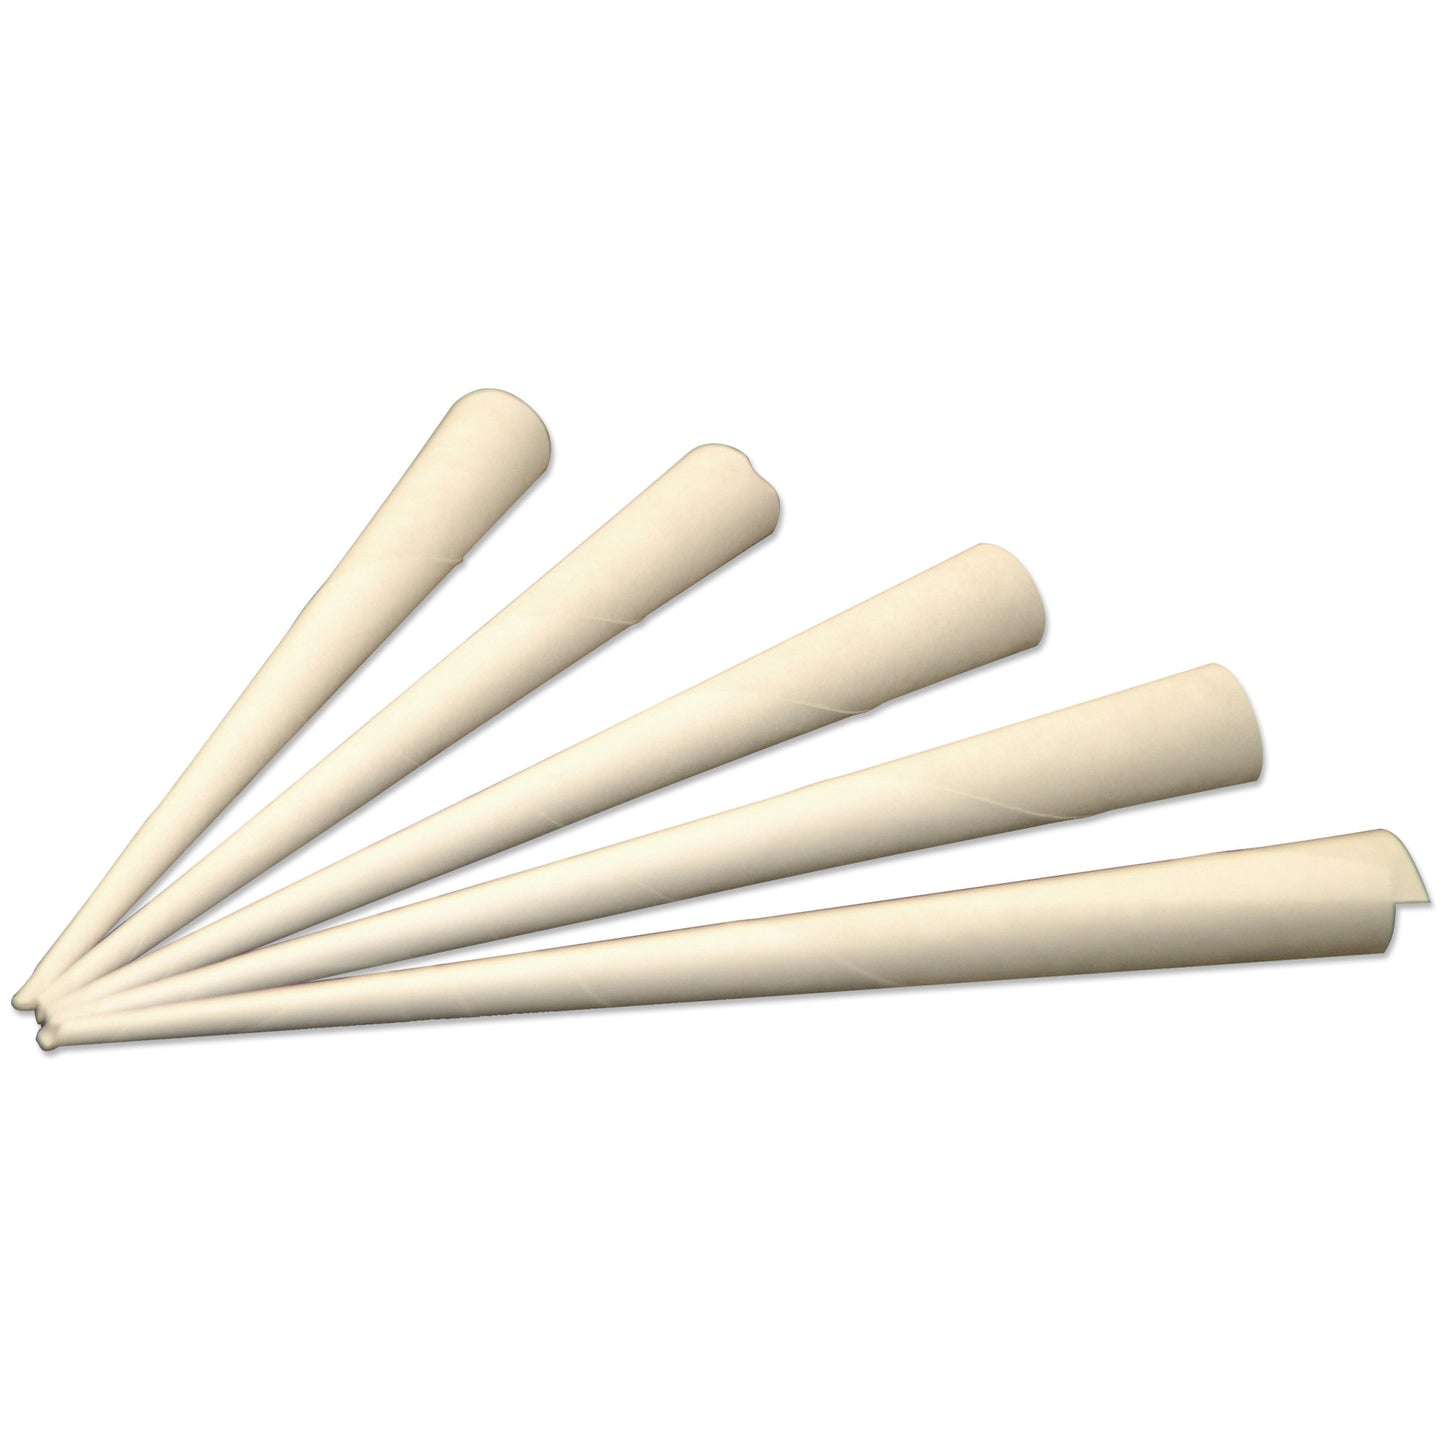 83005 - BenchmarkUSA Cotton Candy Paper Cones